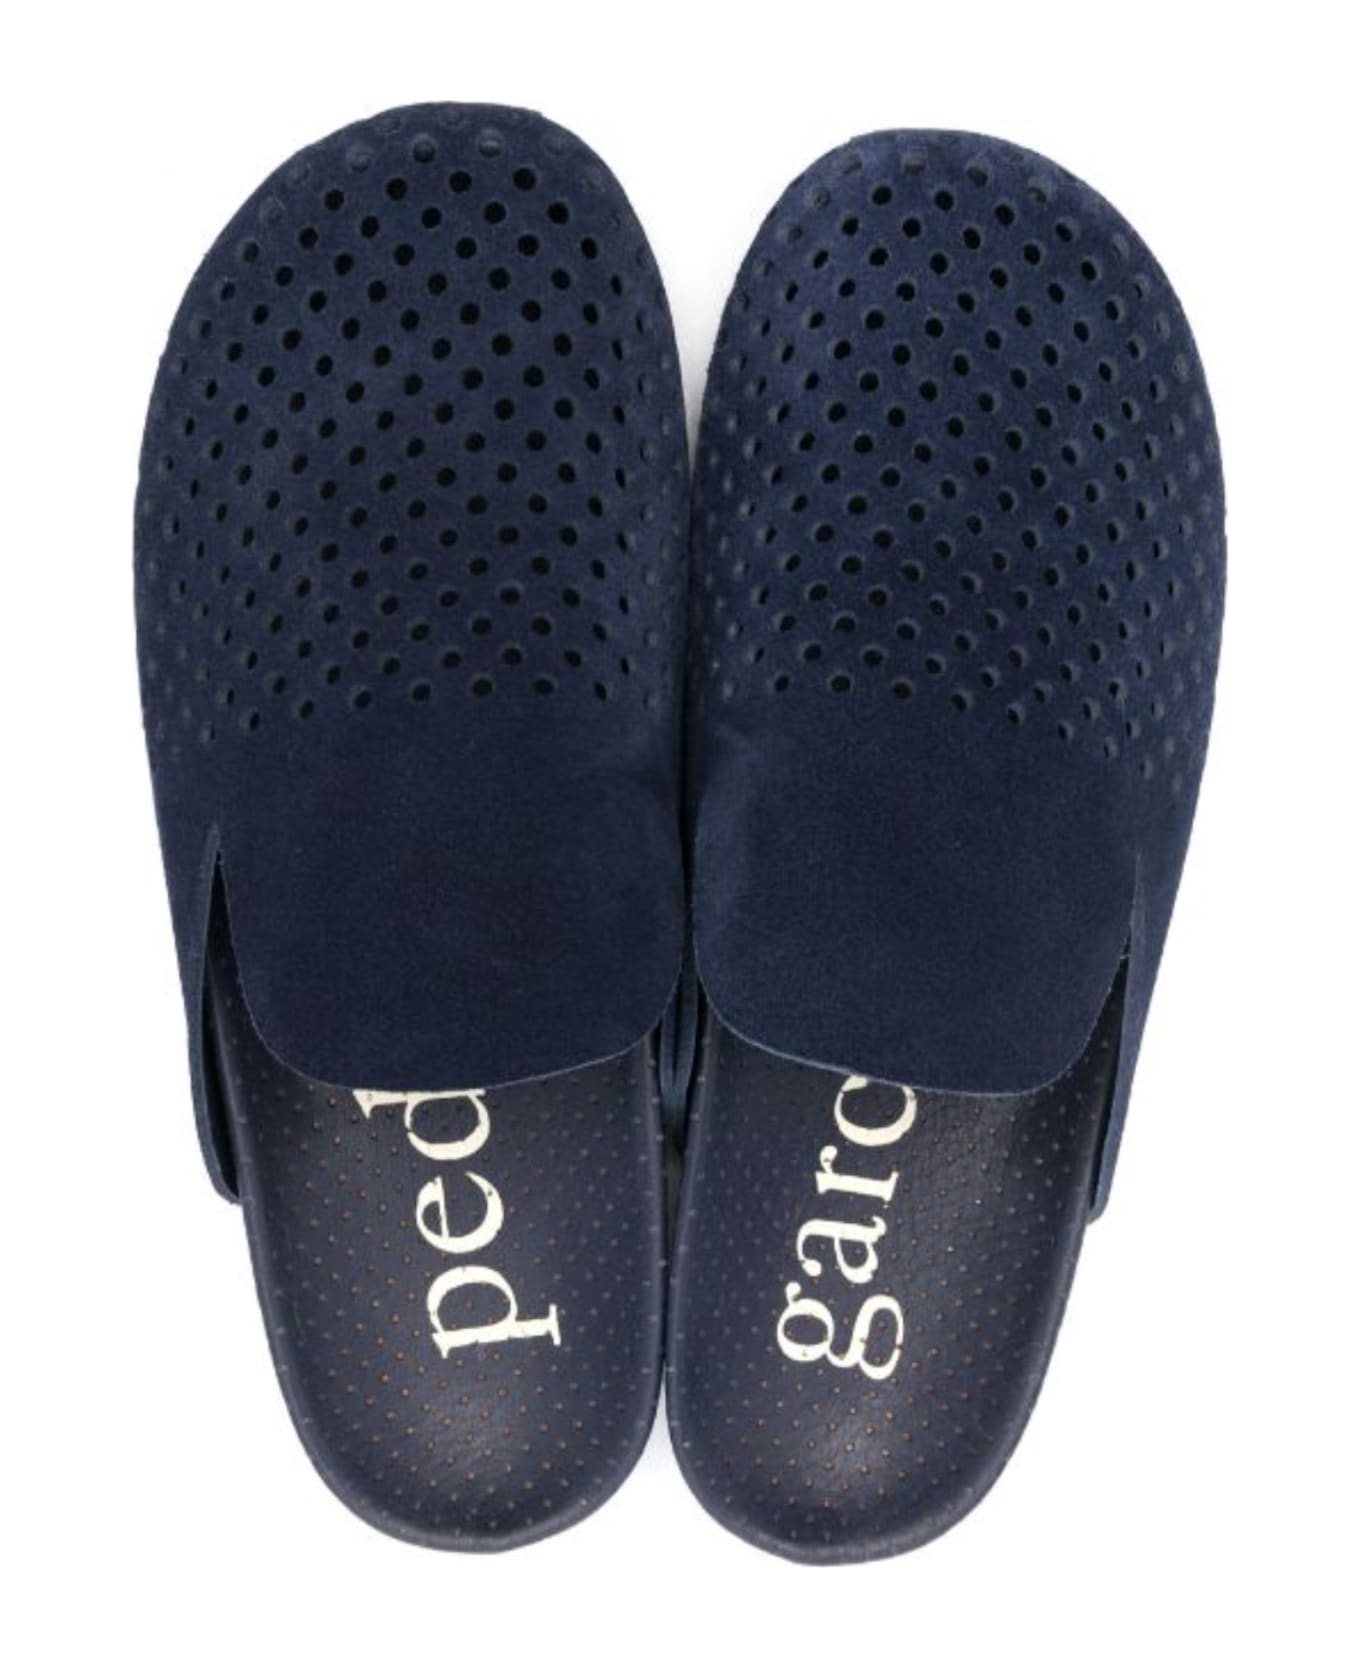 Pedro Garcia Casual Suede Slippers - Blue